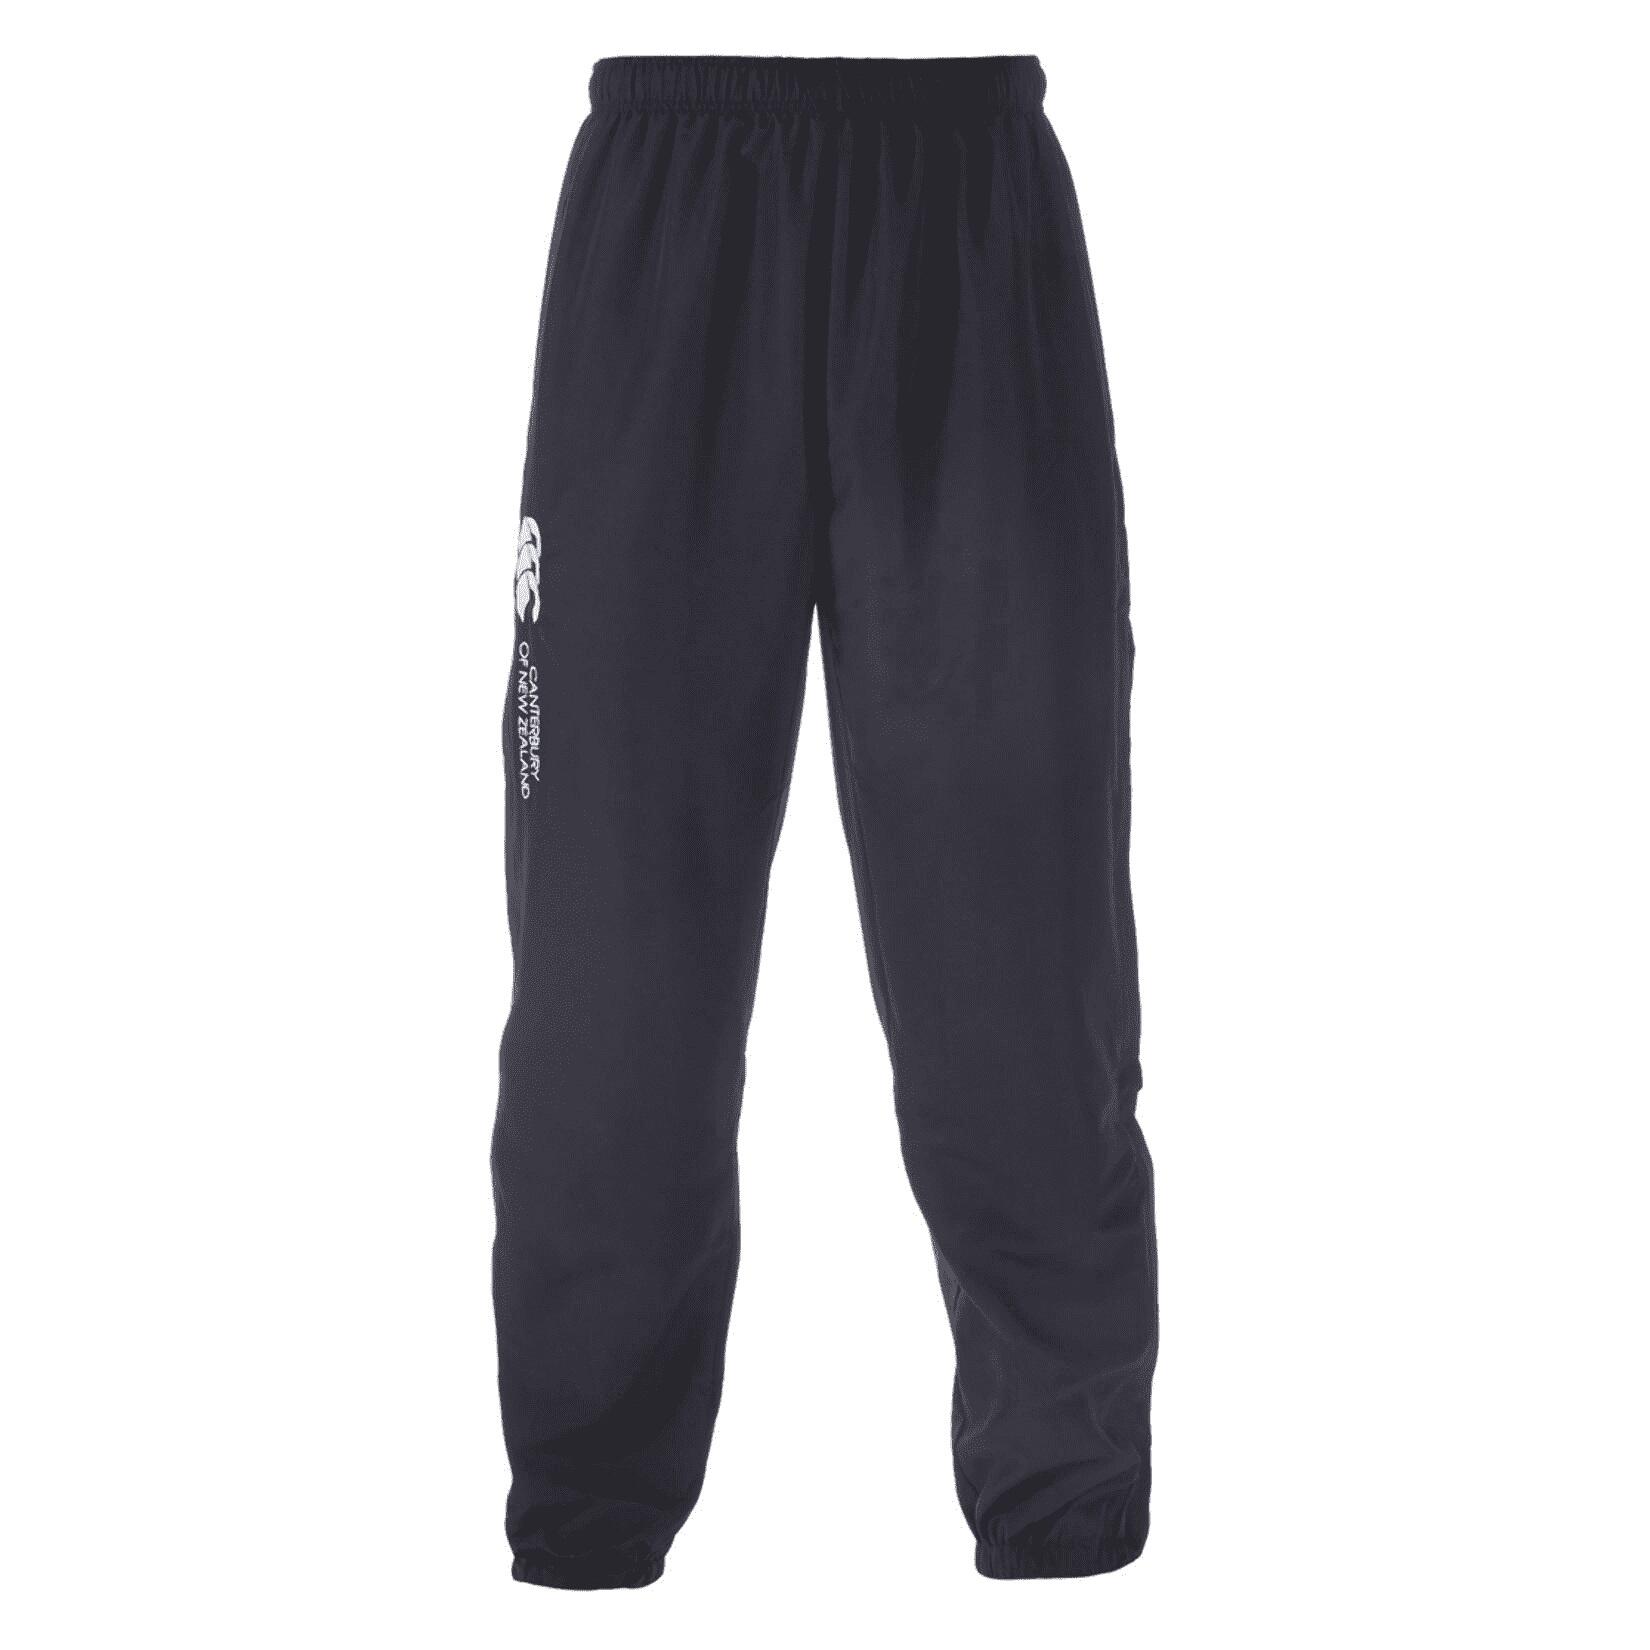 Childrens/Kids Cuffed Ankle Tracksuit Bottoms (Navy) 1/3